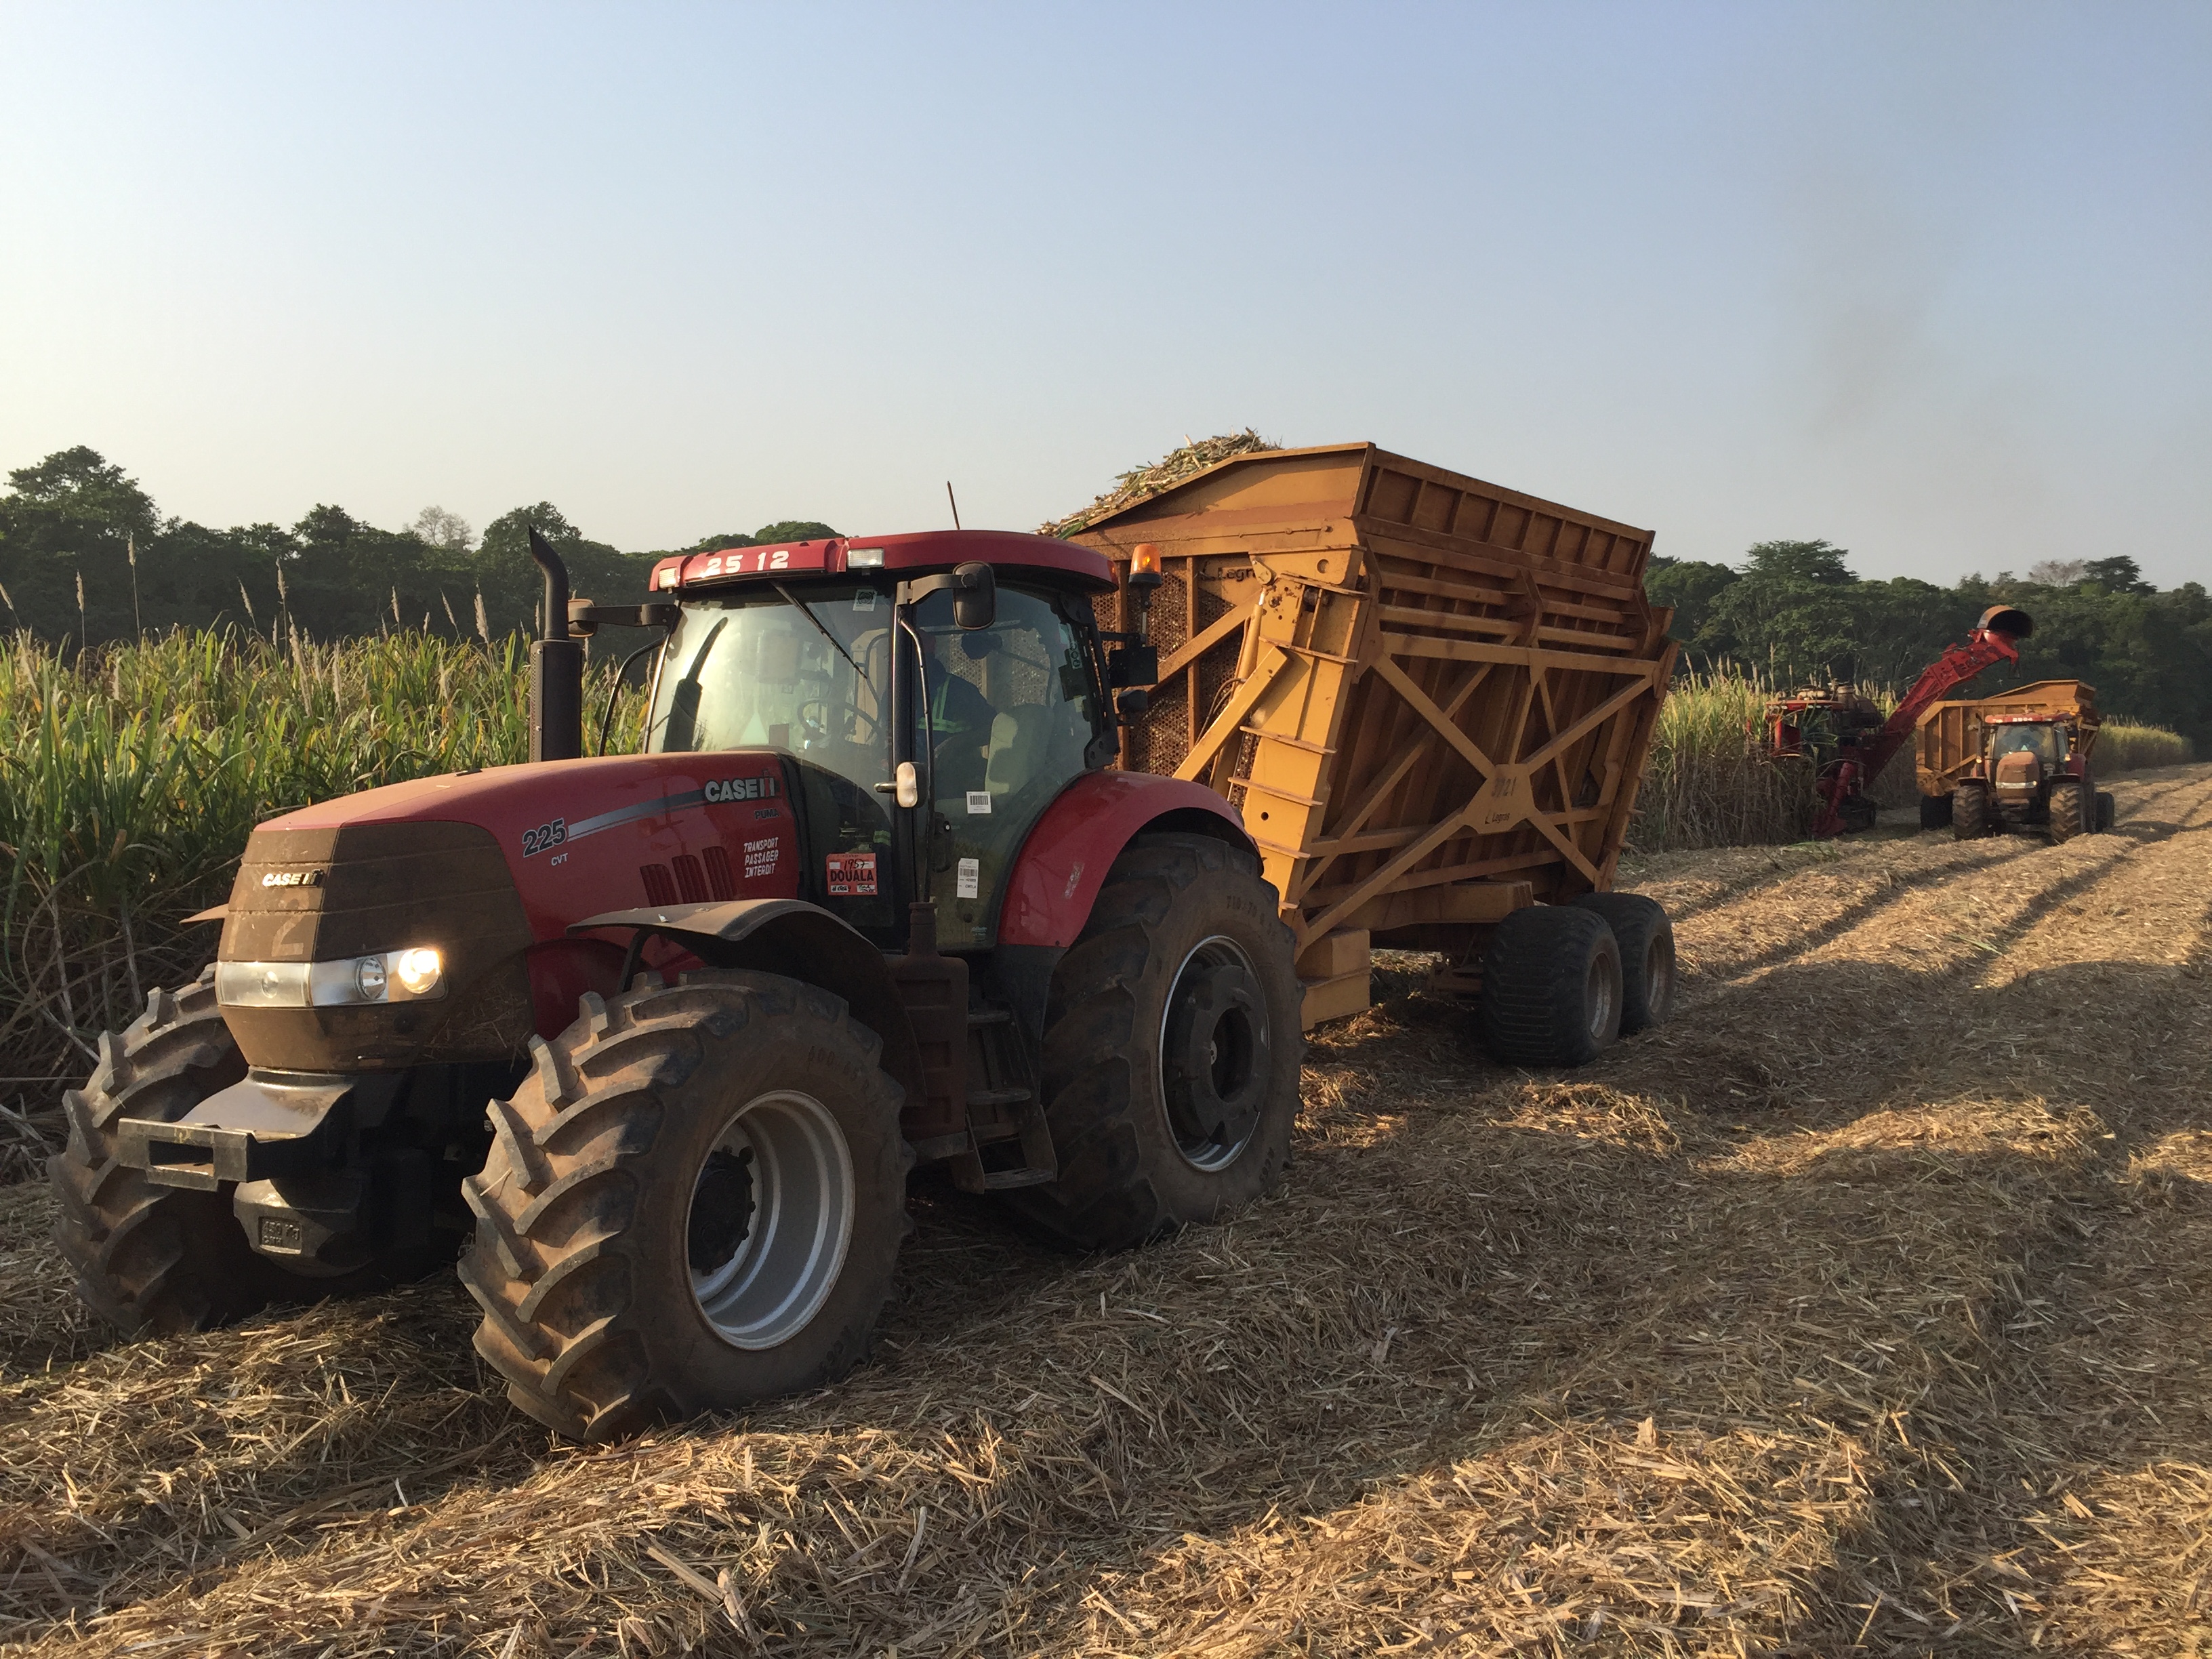 DRIVING AFRICAS GROWTH: SOMDIAA CHOOSES CASE IH FOR ITS CAMEROON SUGAR CANE PLANTATIONS